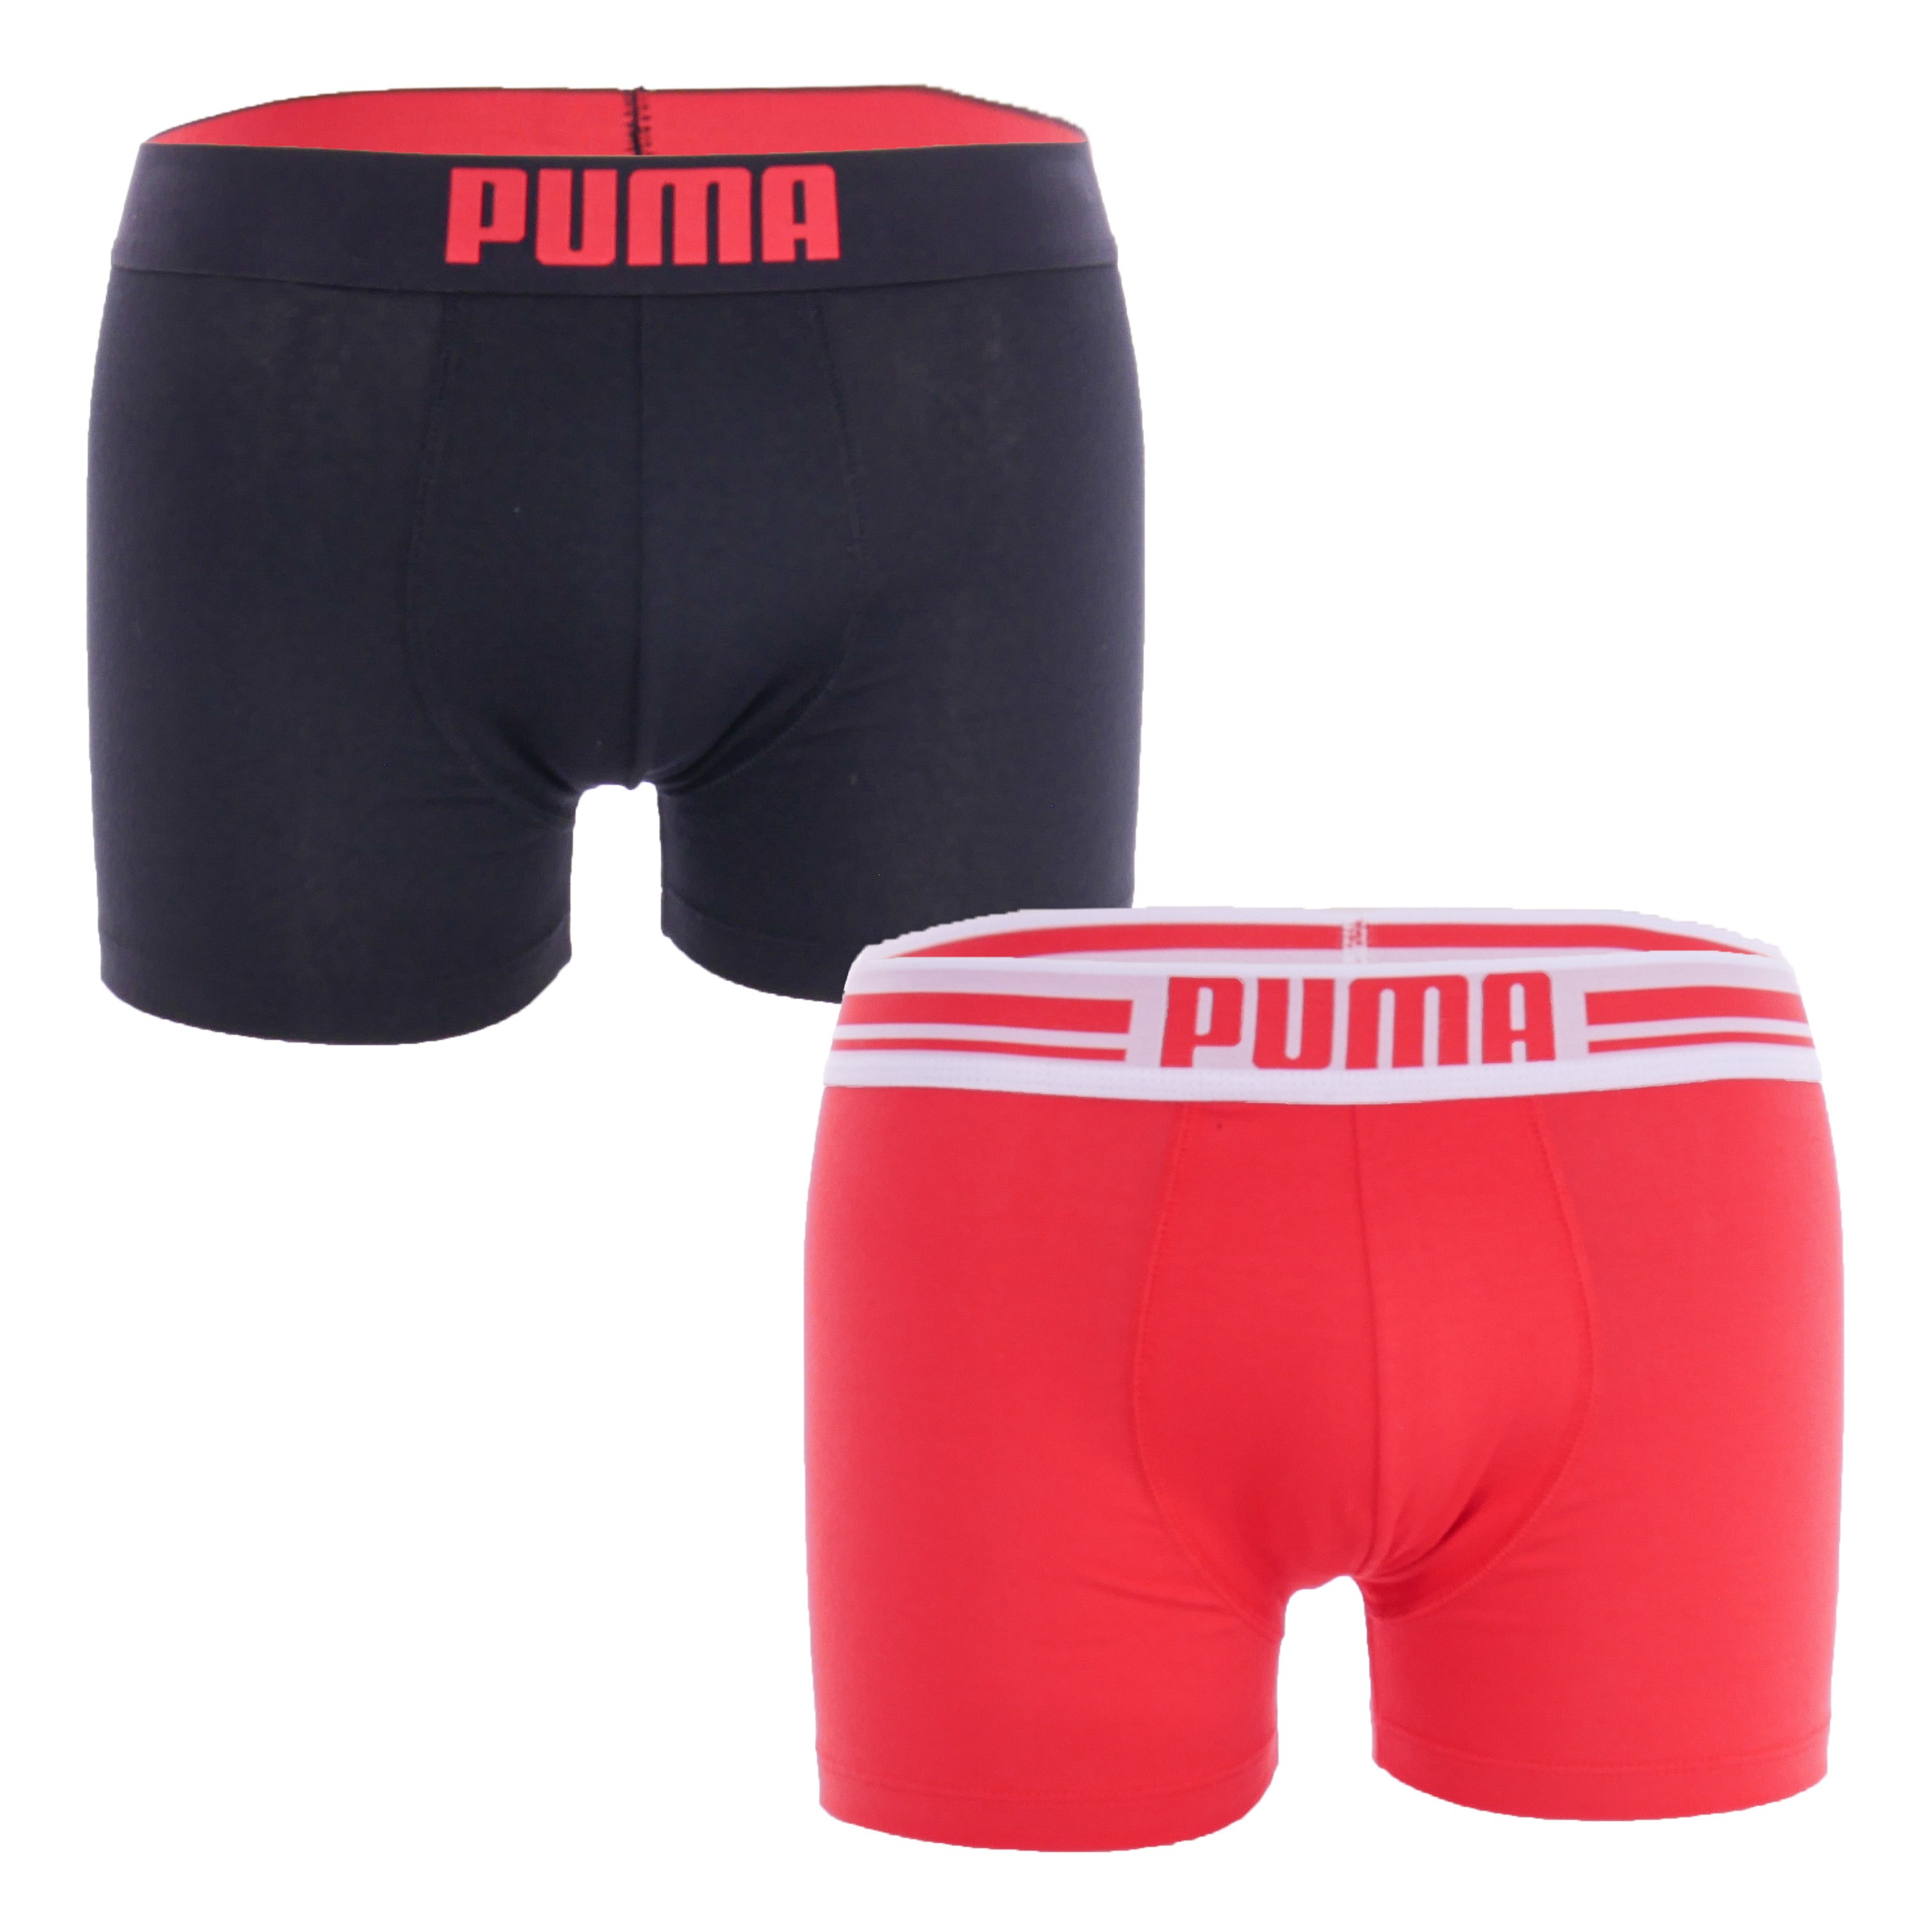 https://www.luniversdelhomme.com/95424/set-of-2-boxers-with-puma-logo-red-and-black.jpg